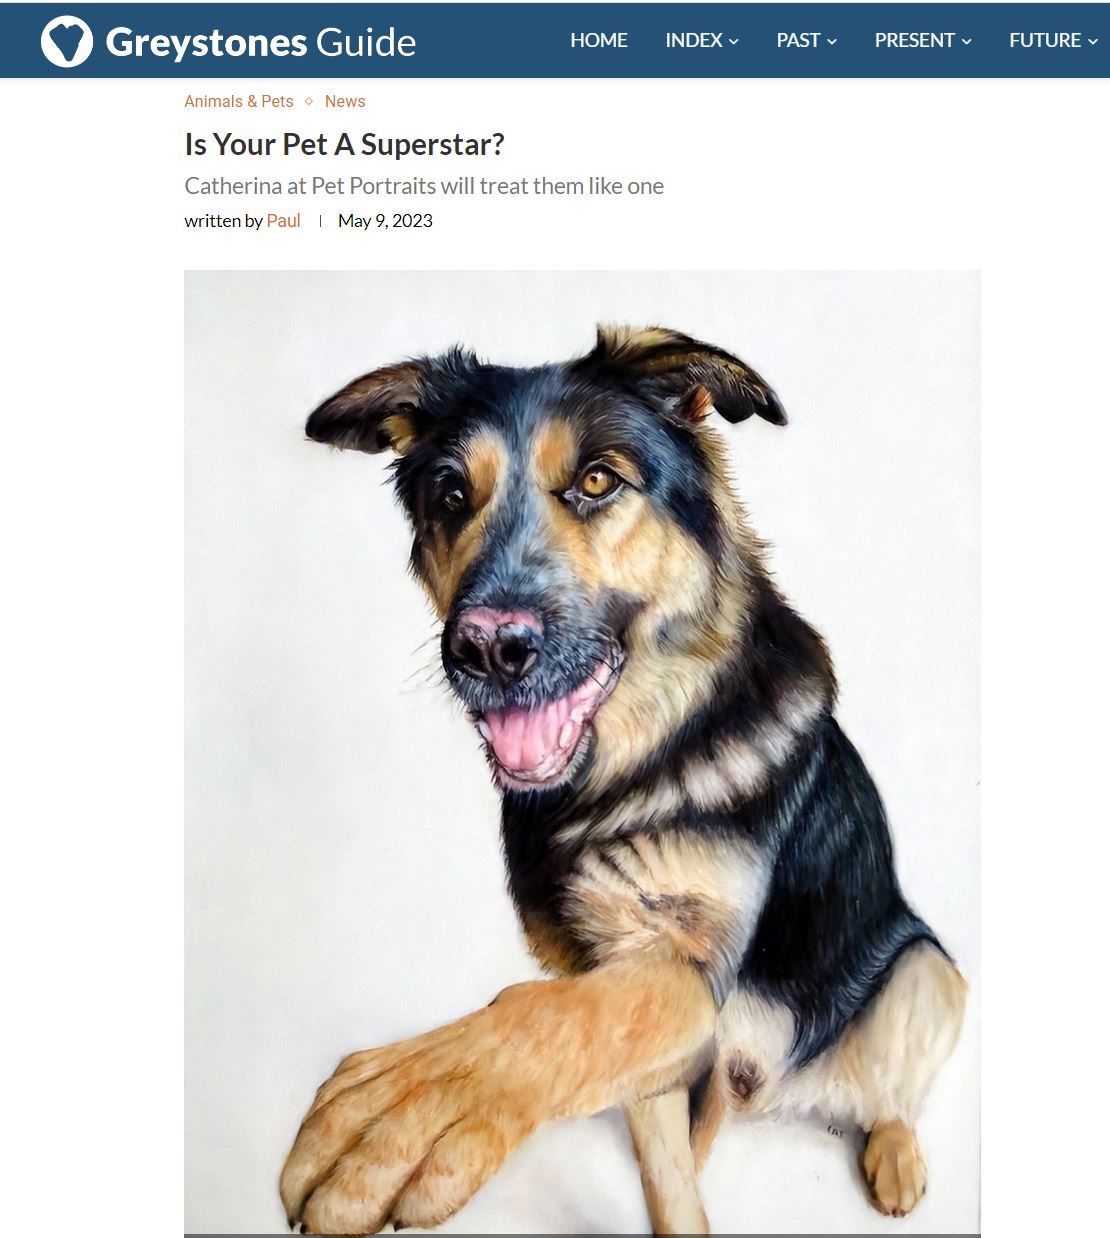 Is your pet a Superstar